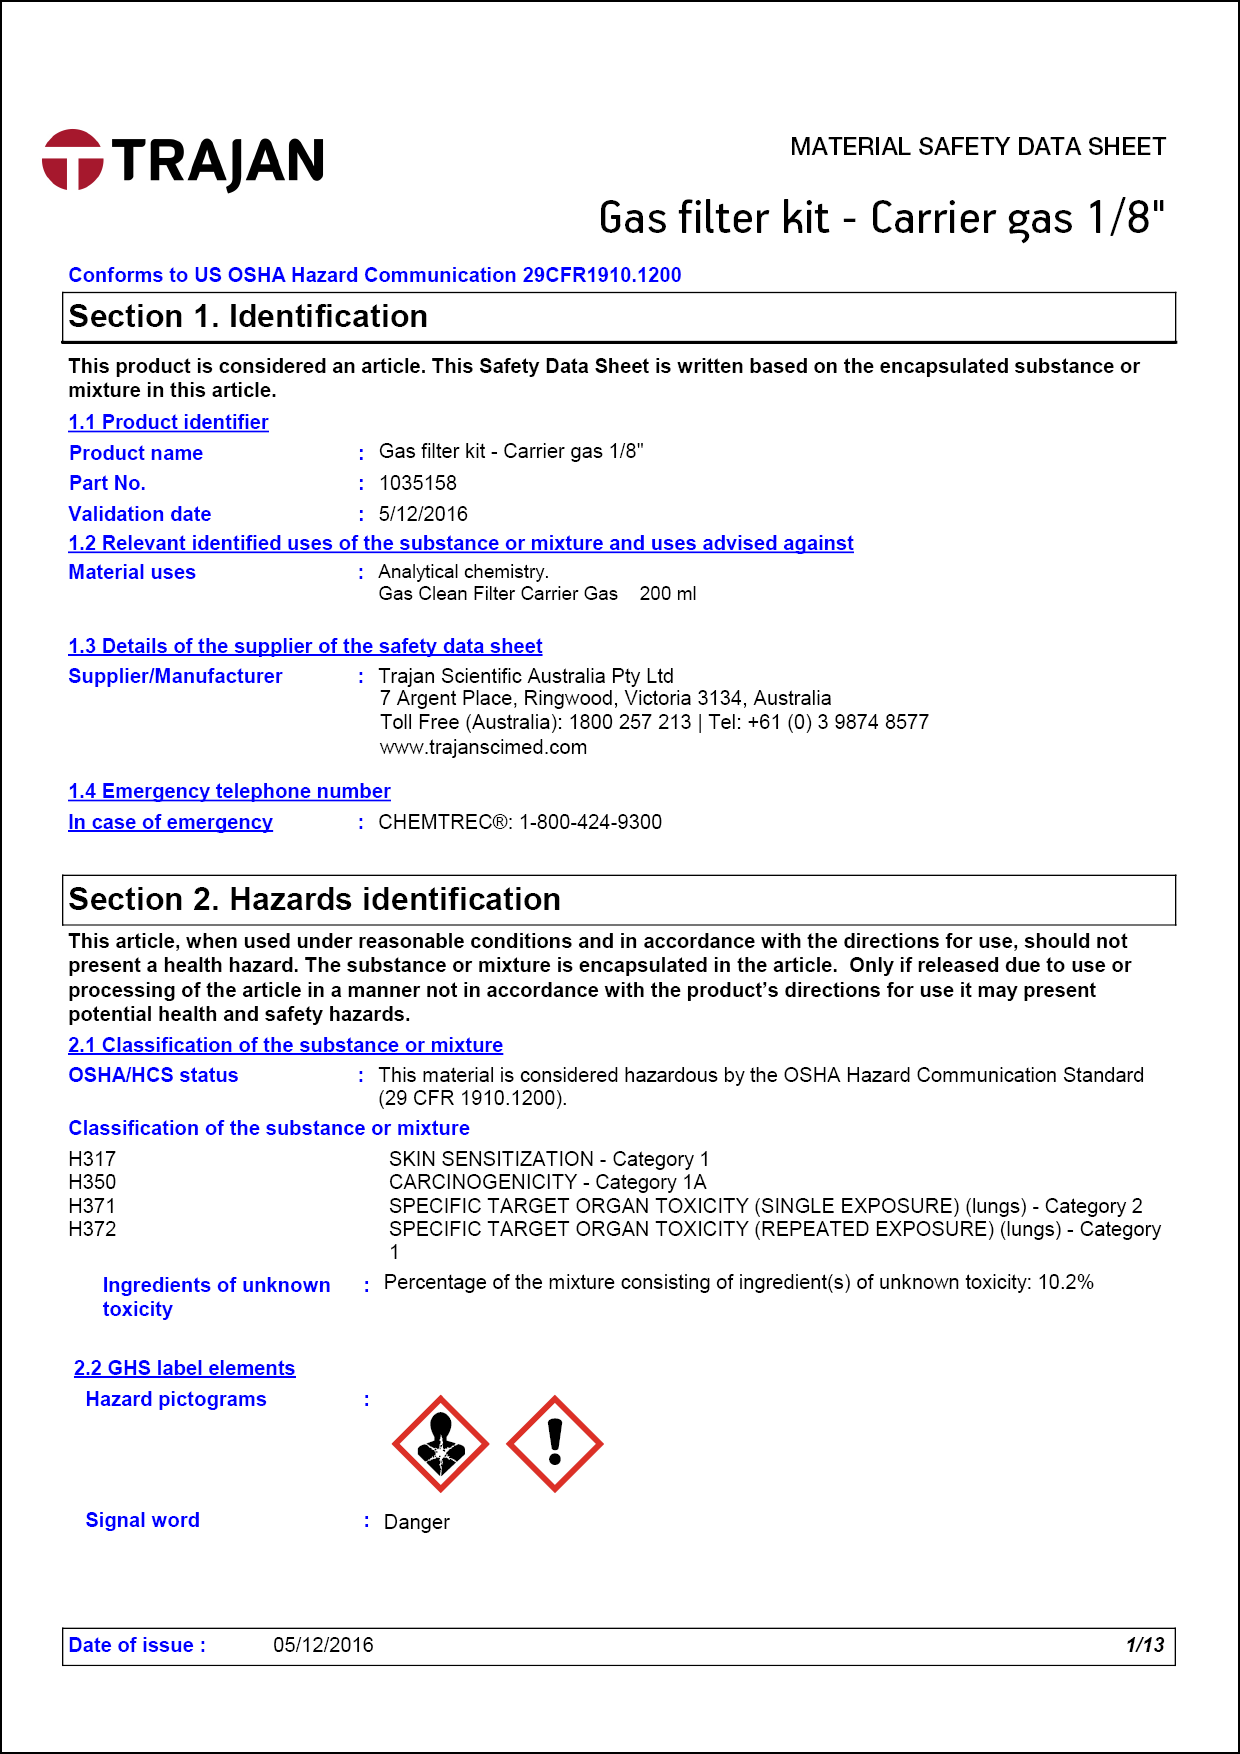 Material safety data sheet - Gas filter kits - Carrier gas 1/8"